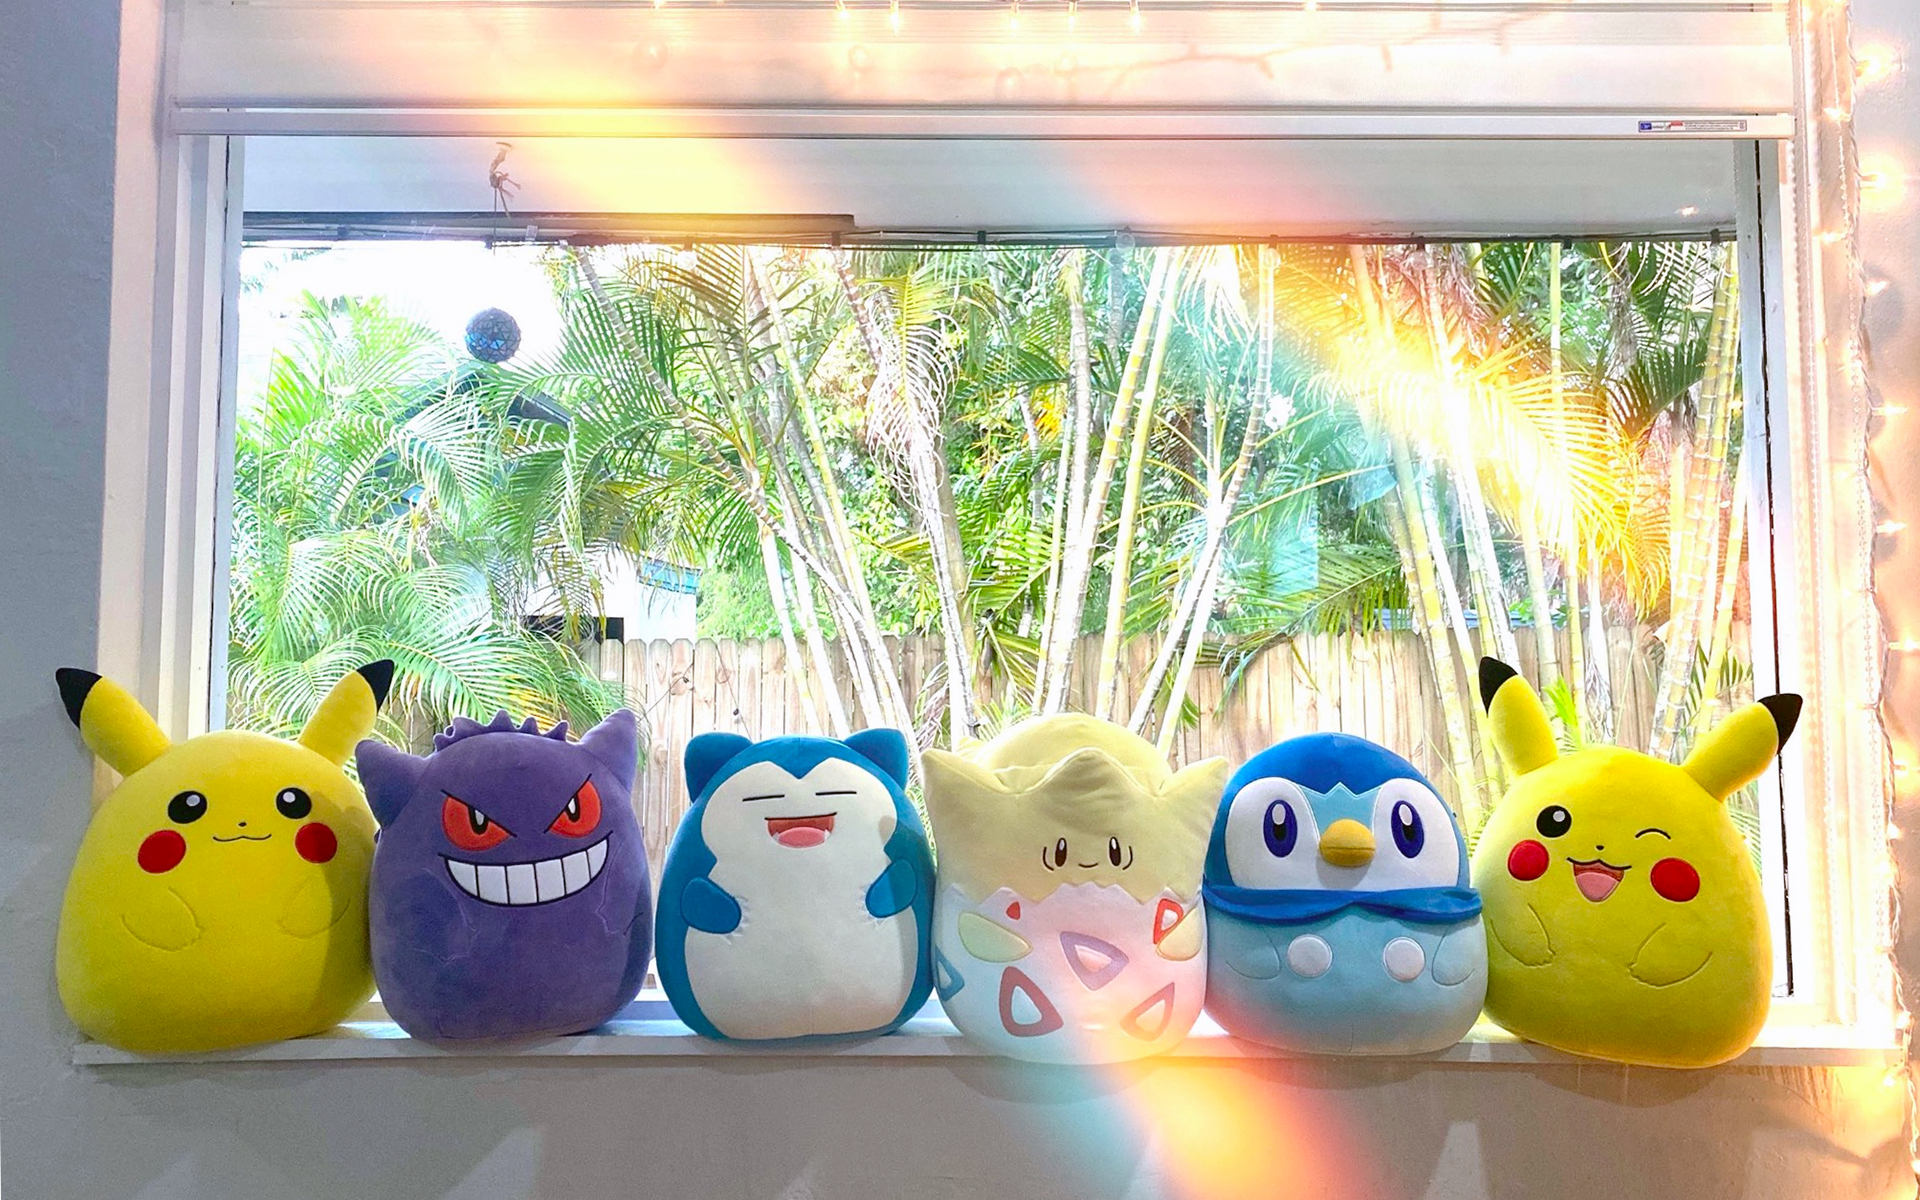 A lineup of Pokémon Squishmallows for Pikachu, Gengar, Snorlax, Togepi, Piplup and winking Pikachu sitting on a window sill